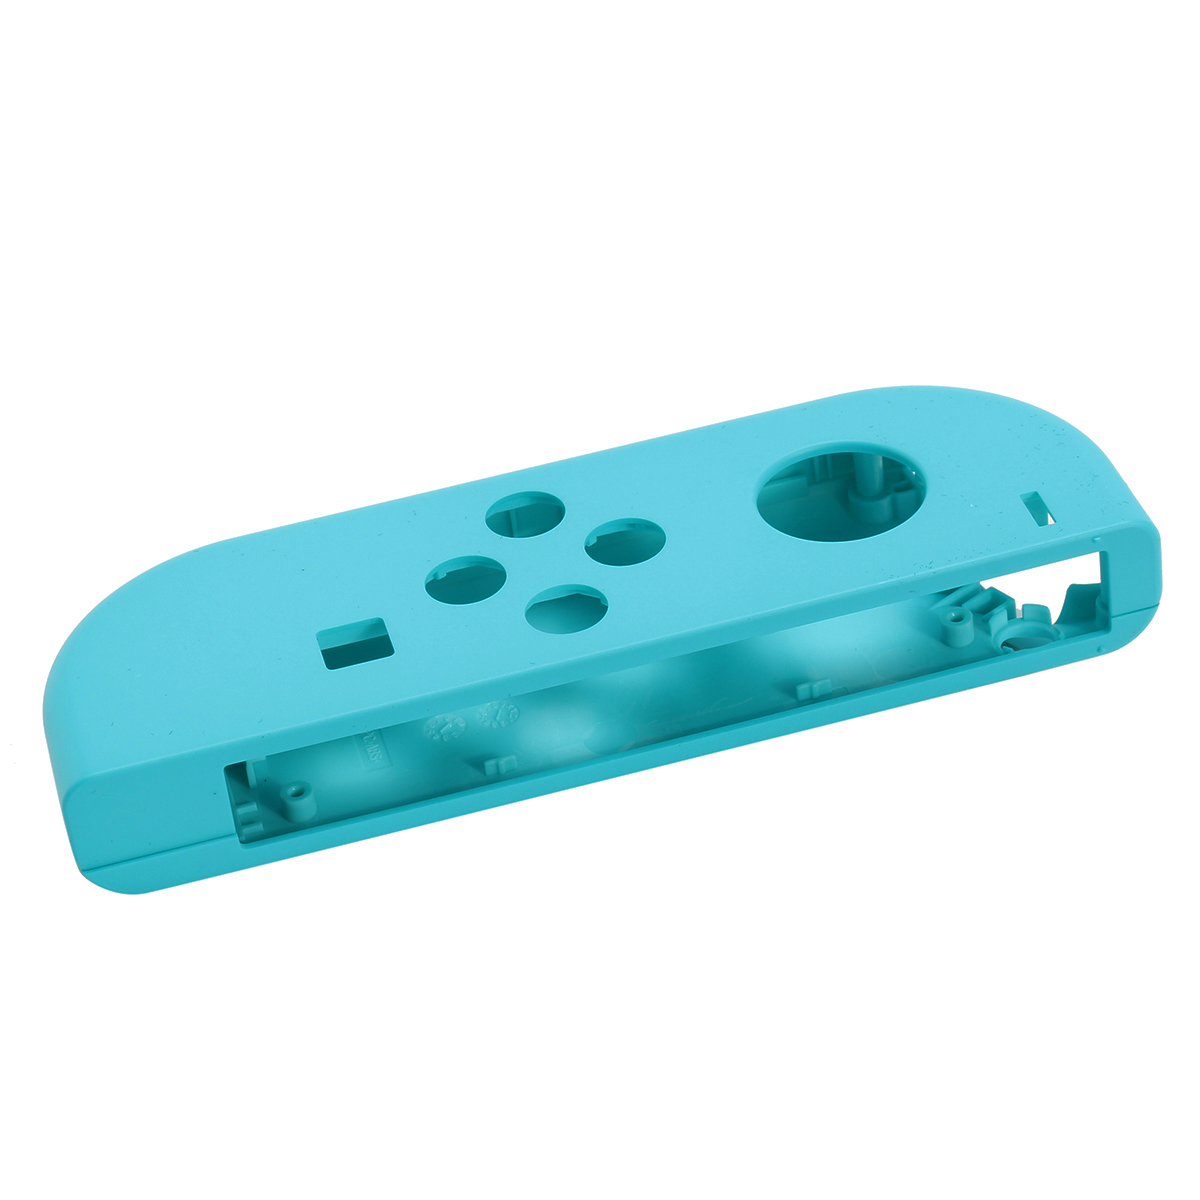 Blue Housing Shell Case with Repair Tool for Nintendo Switch Joy-Con Video Game Controller